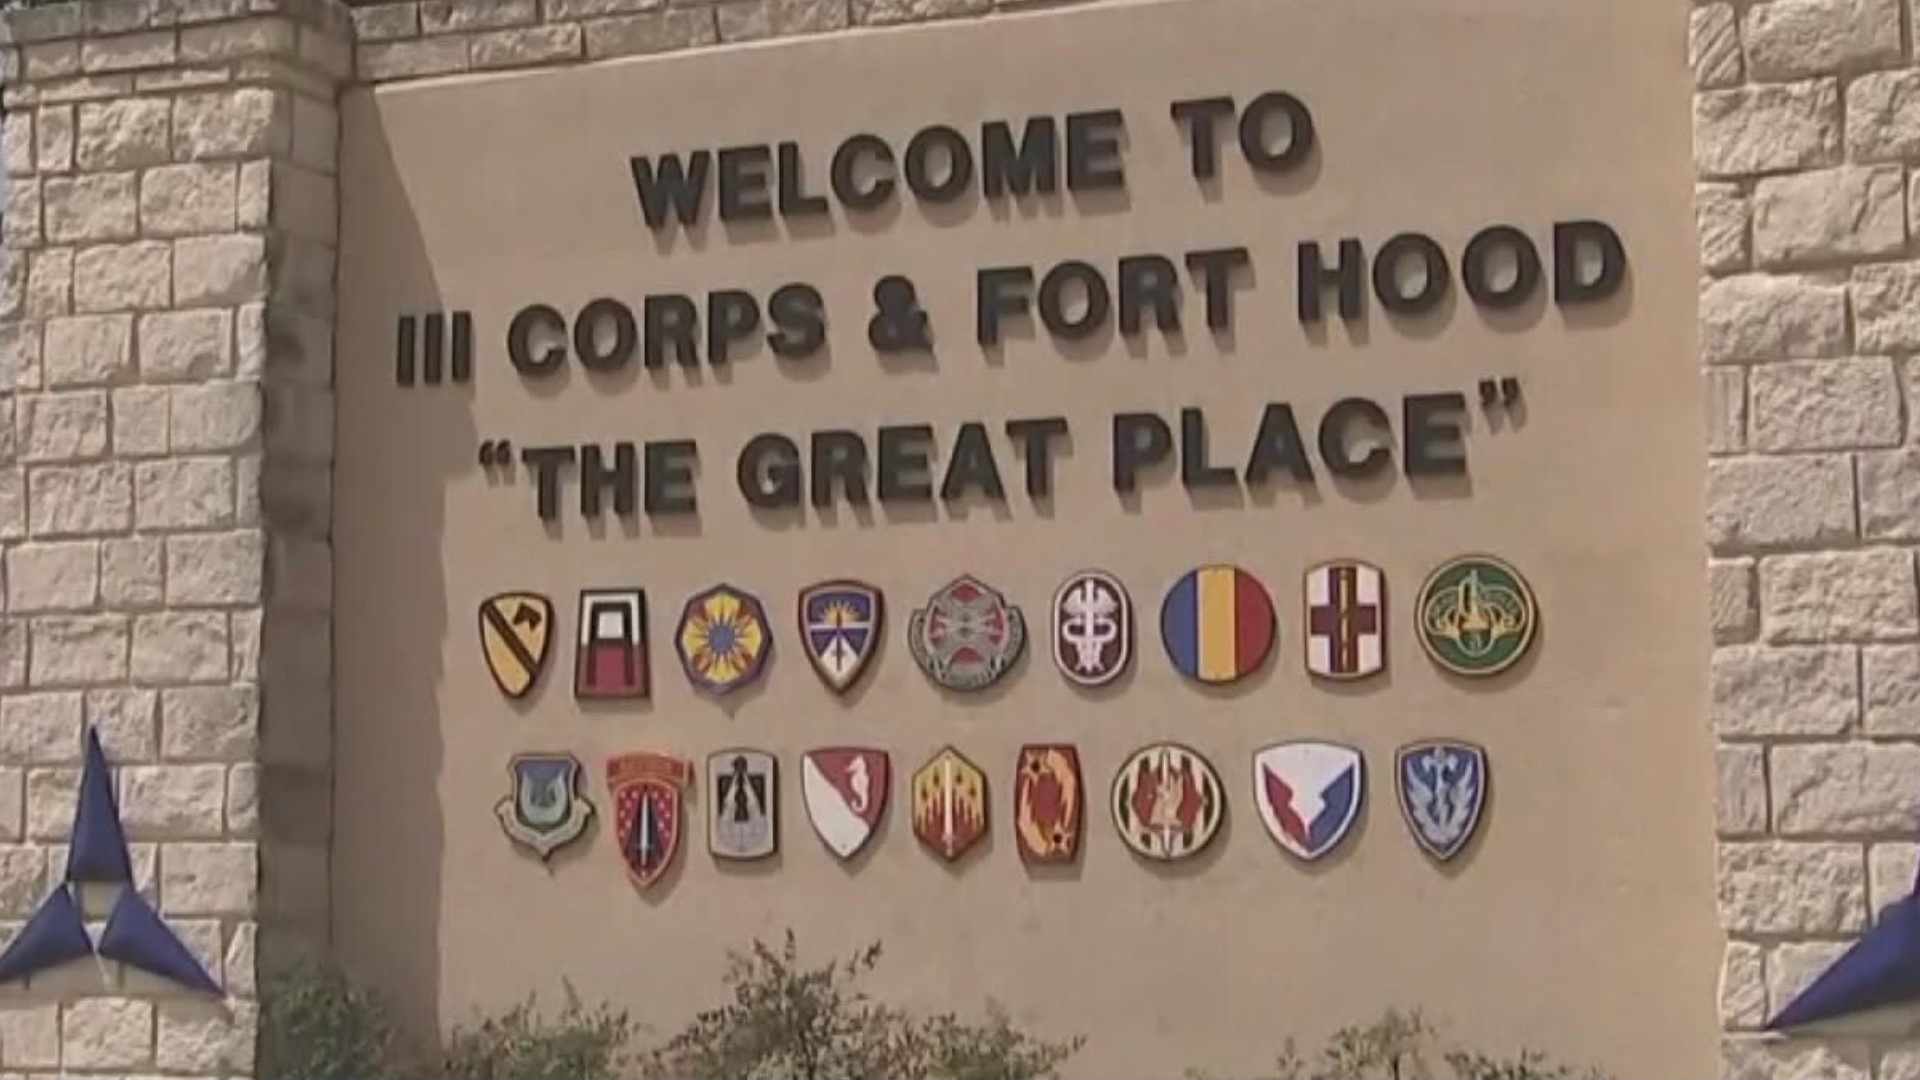 The soldier was found unresponsive over the weekend, according to Lt. Col. Jennifer Bocanegra. The soldier is now dead.